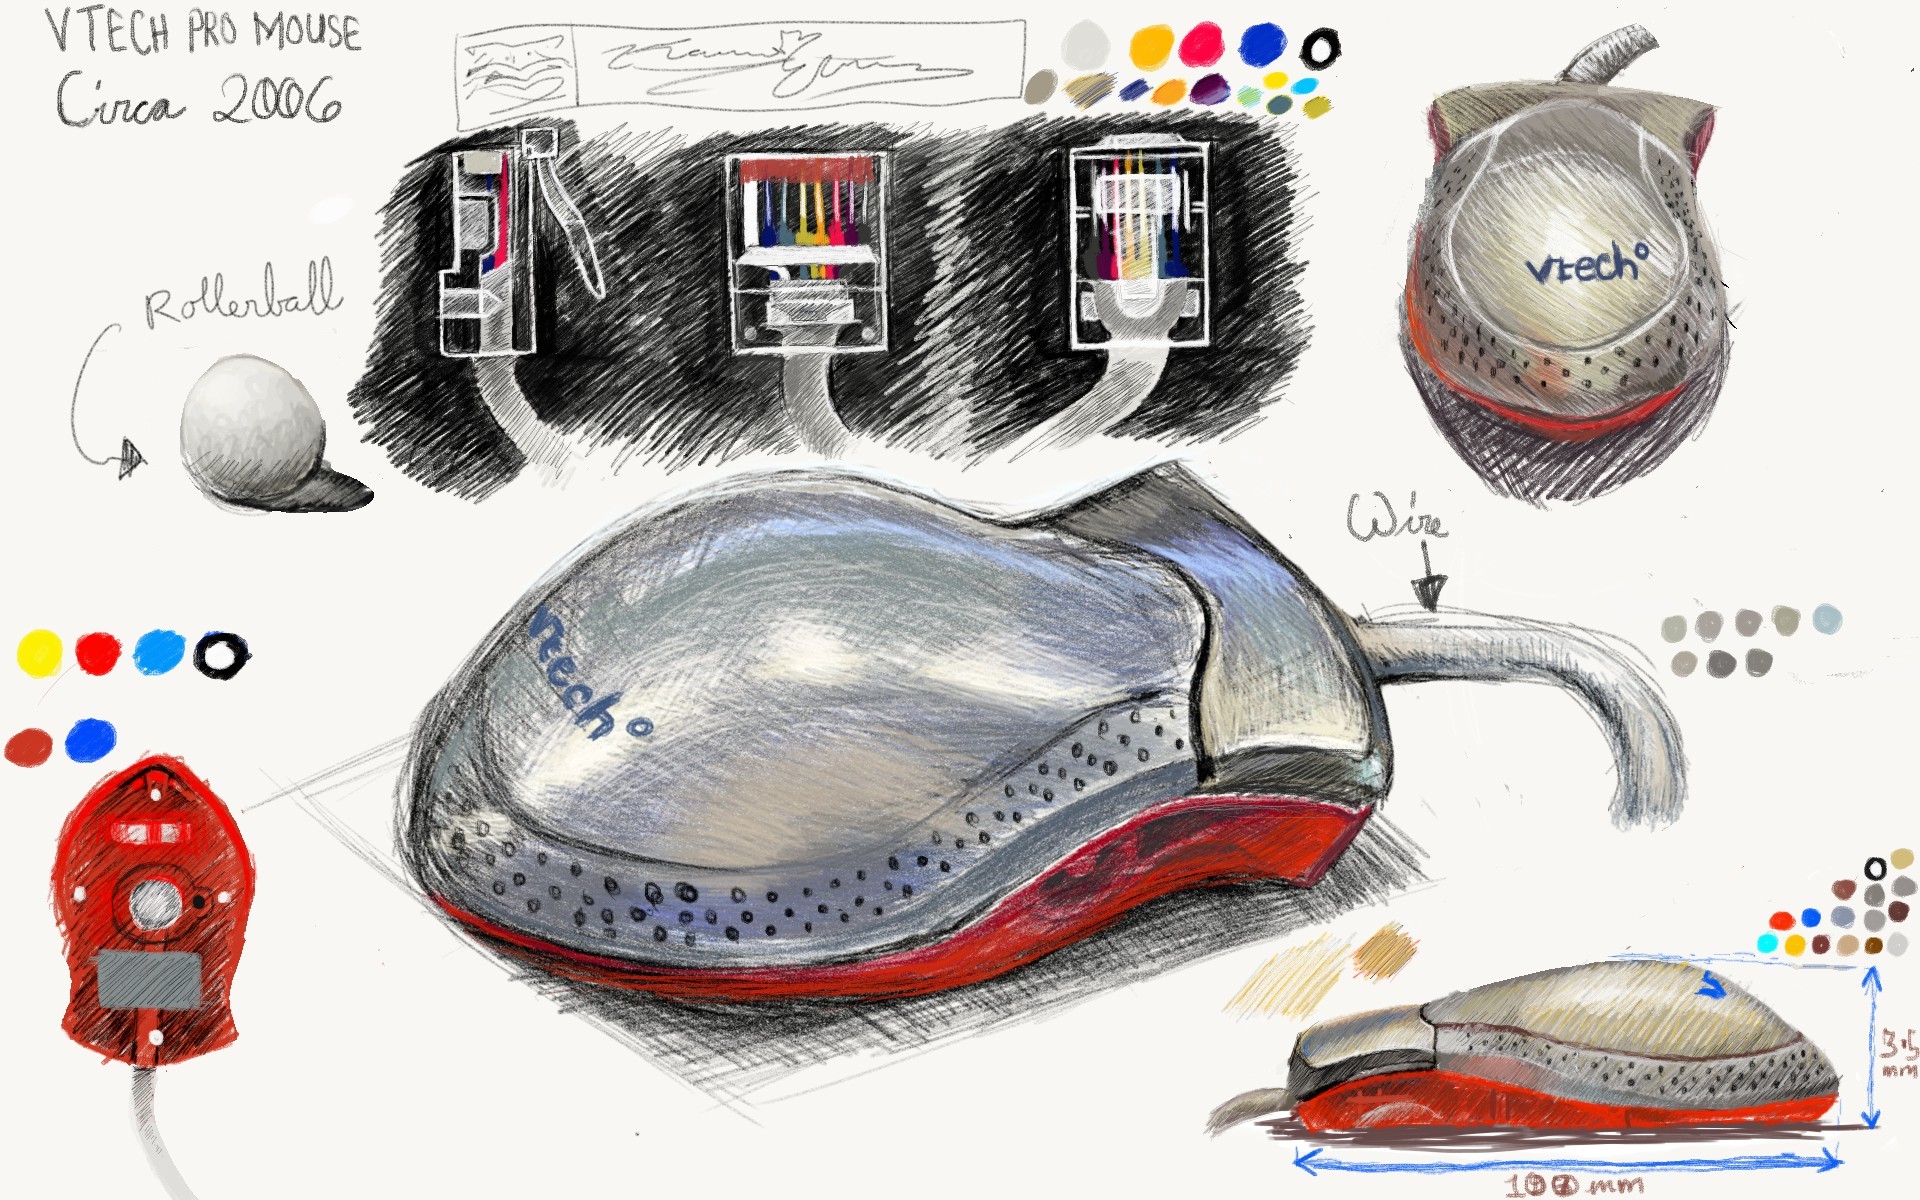 Computer Mouse Sketch Sketch Template | Industrial design sketch, Mouse  sketch, Design sketch